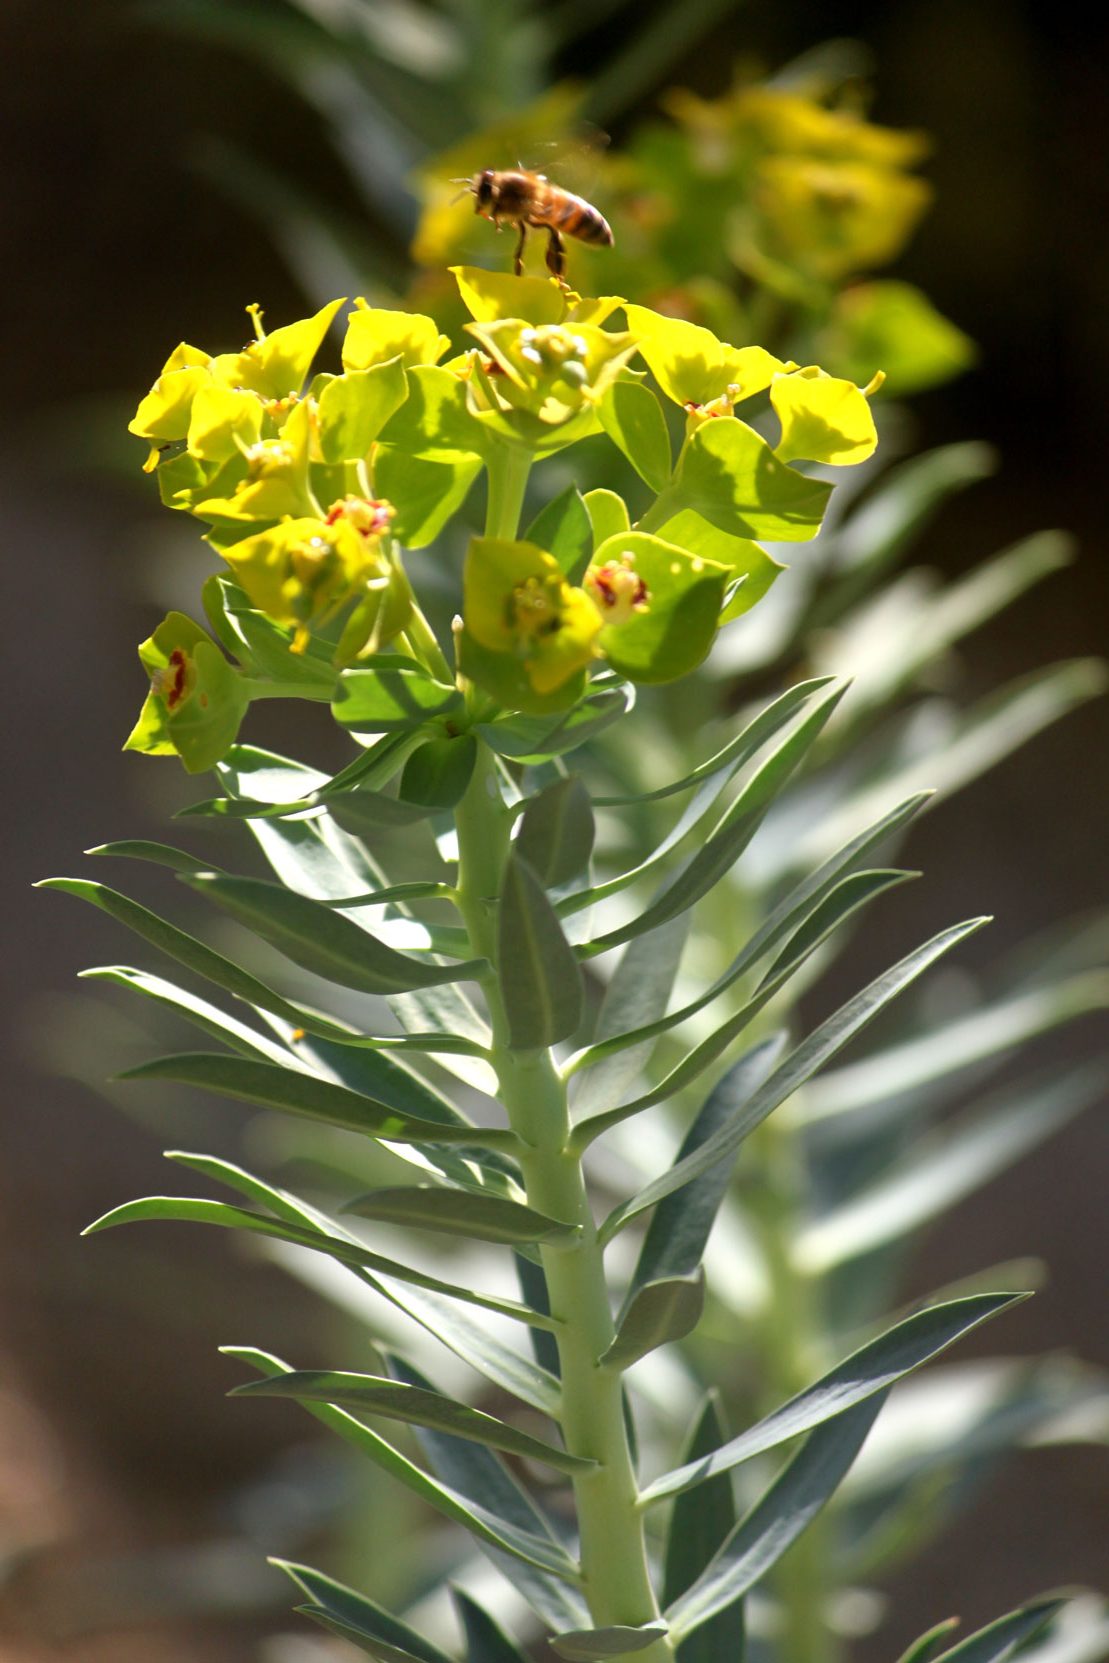 A close-up of the symmetrical flower of the Gopher Plant.